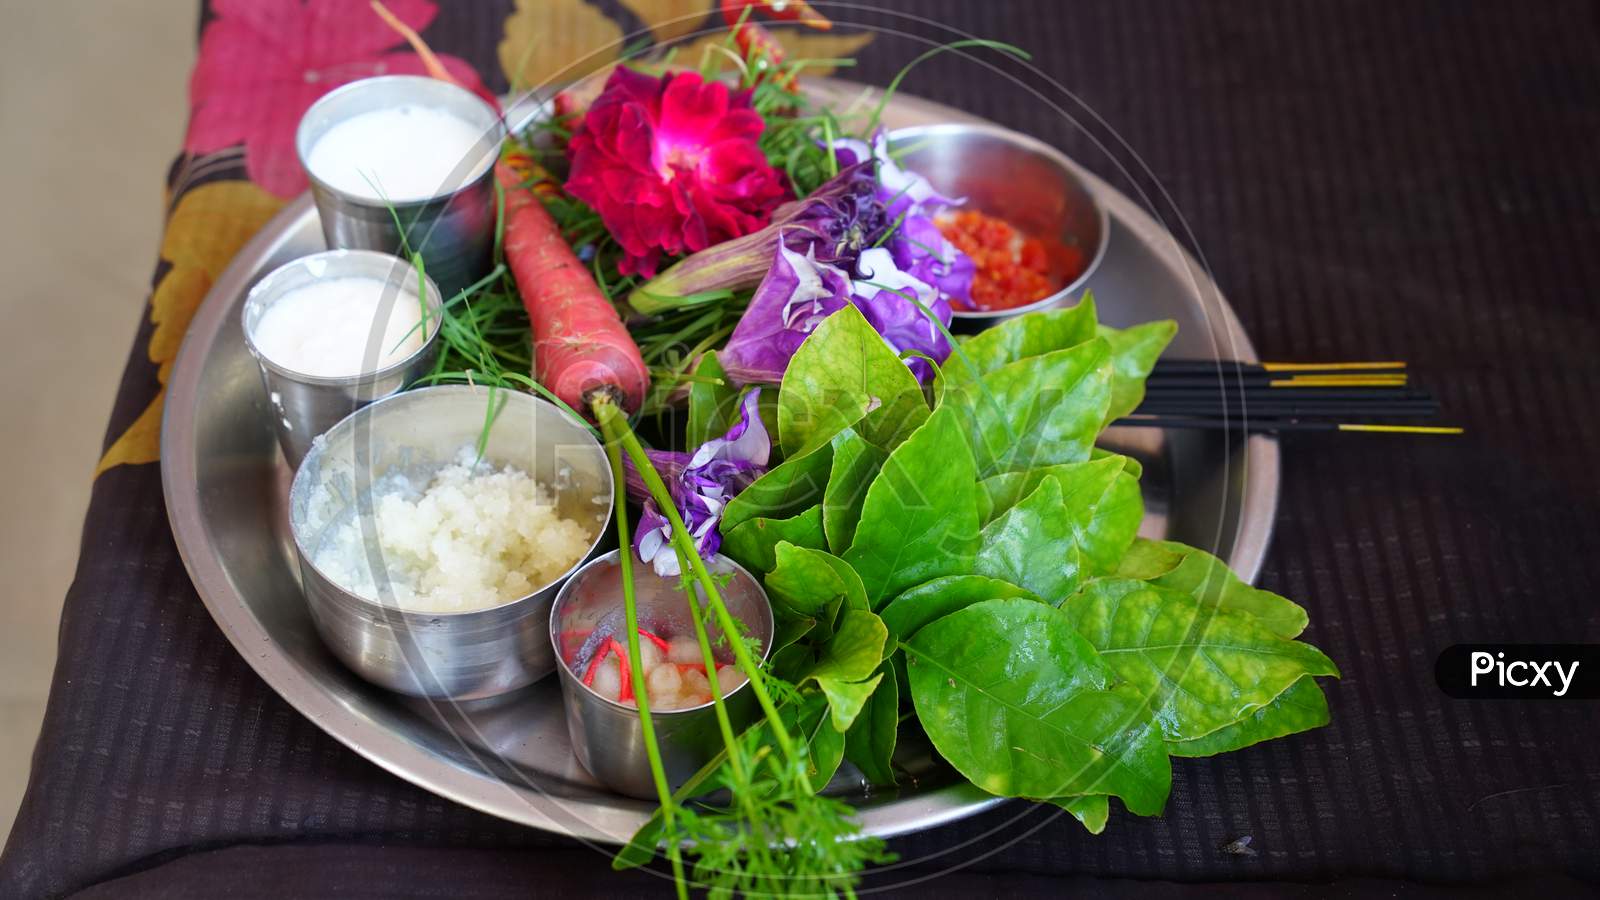 Hindu Puja Plate Closeup. Worship Plate To Prayer Of God. Ornamented Sacred Plate With Bilv Or Scent Sticks And Milk Glass.